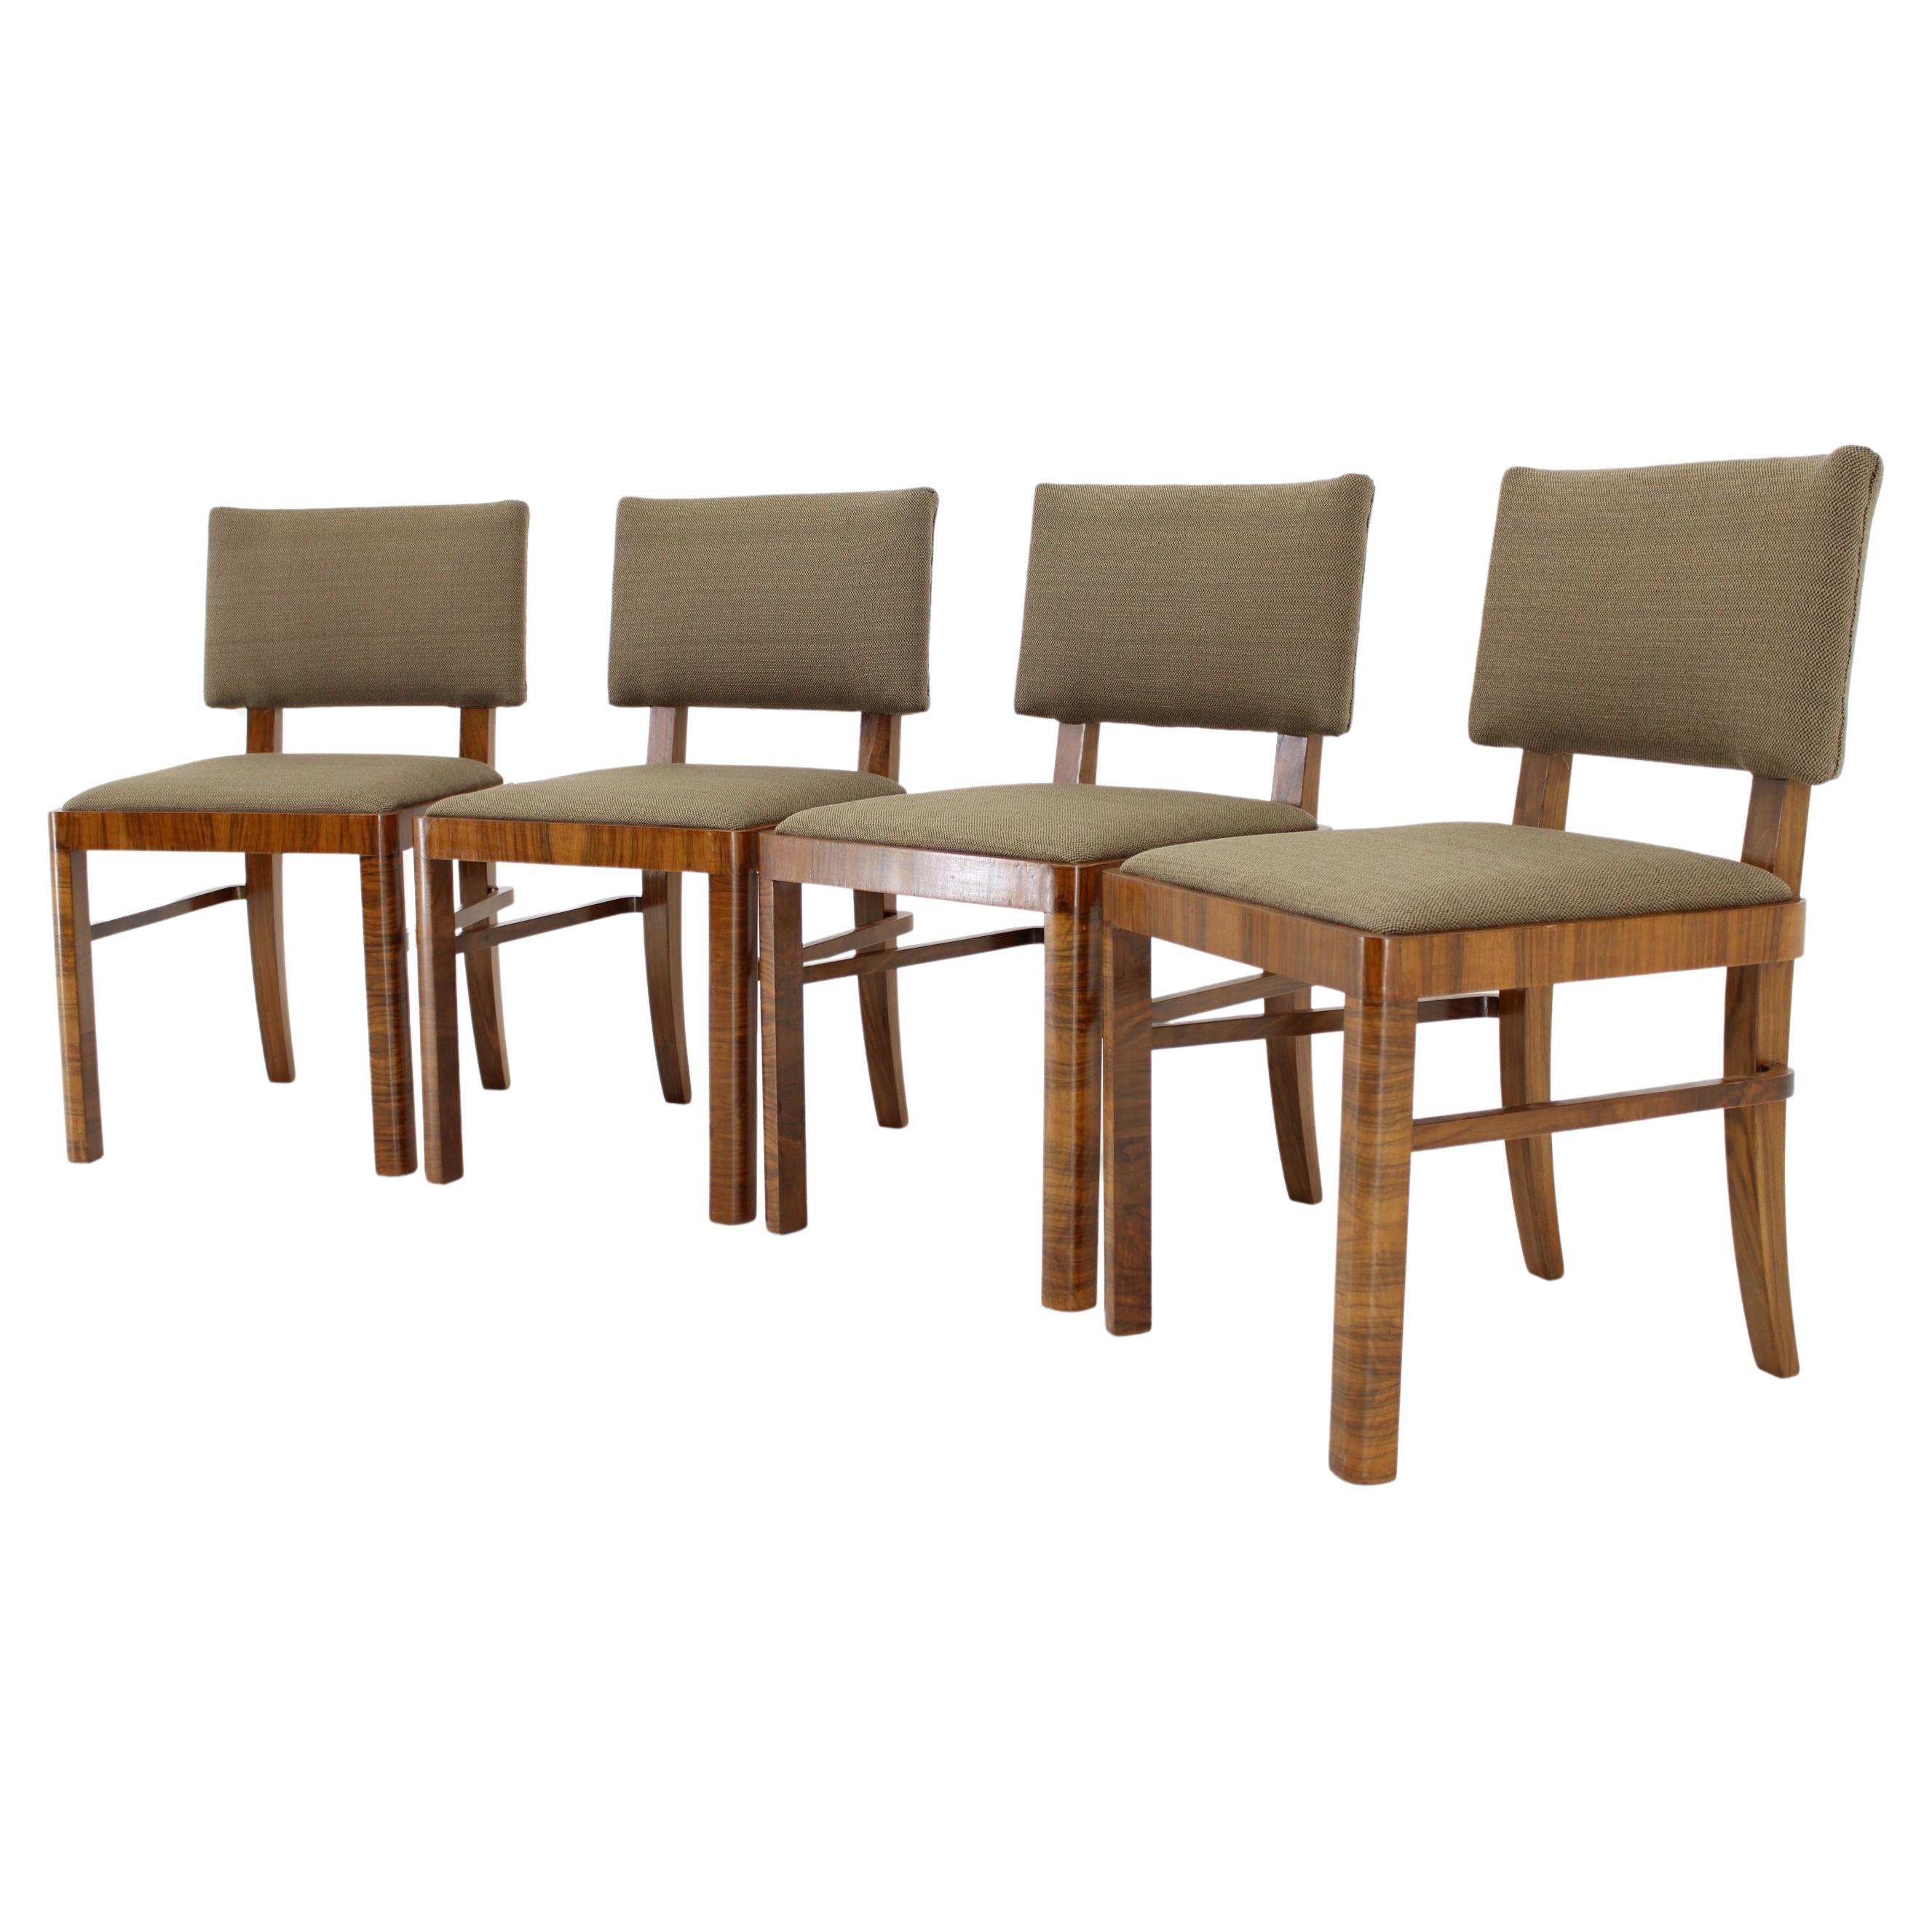 1930s Set of Four Restored Art Deco Dininng Chairs, Czechoslovakia For Sale